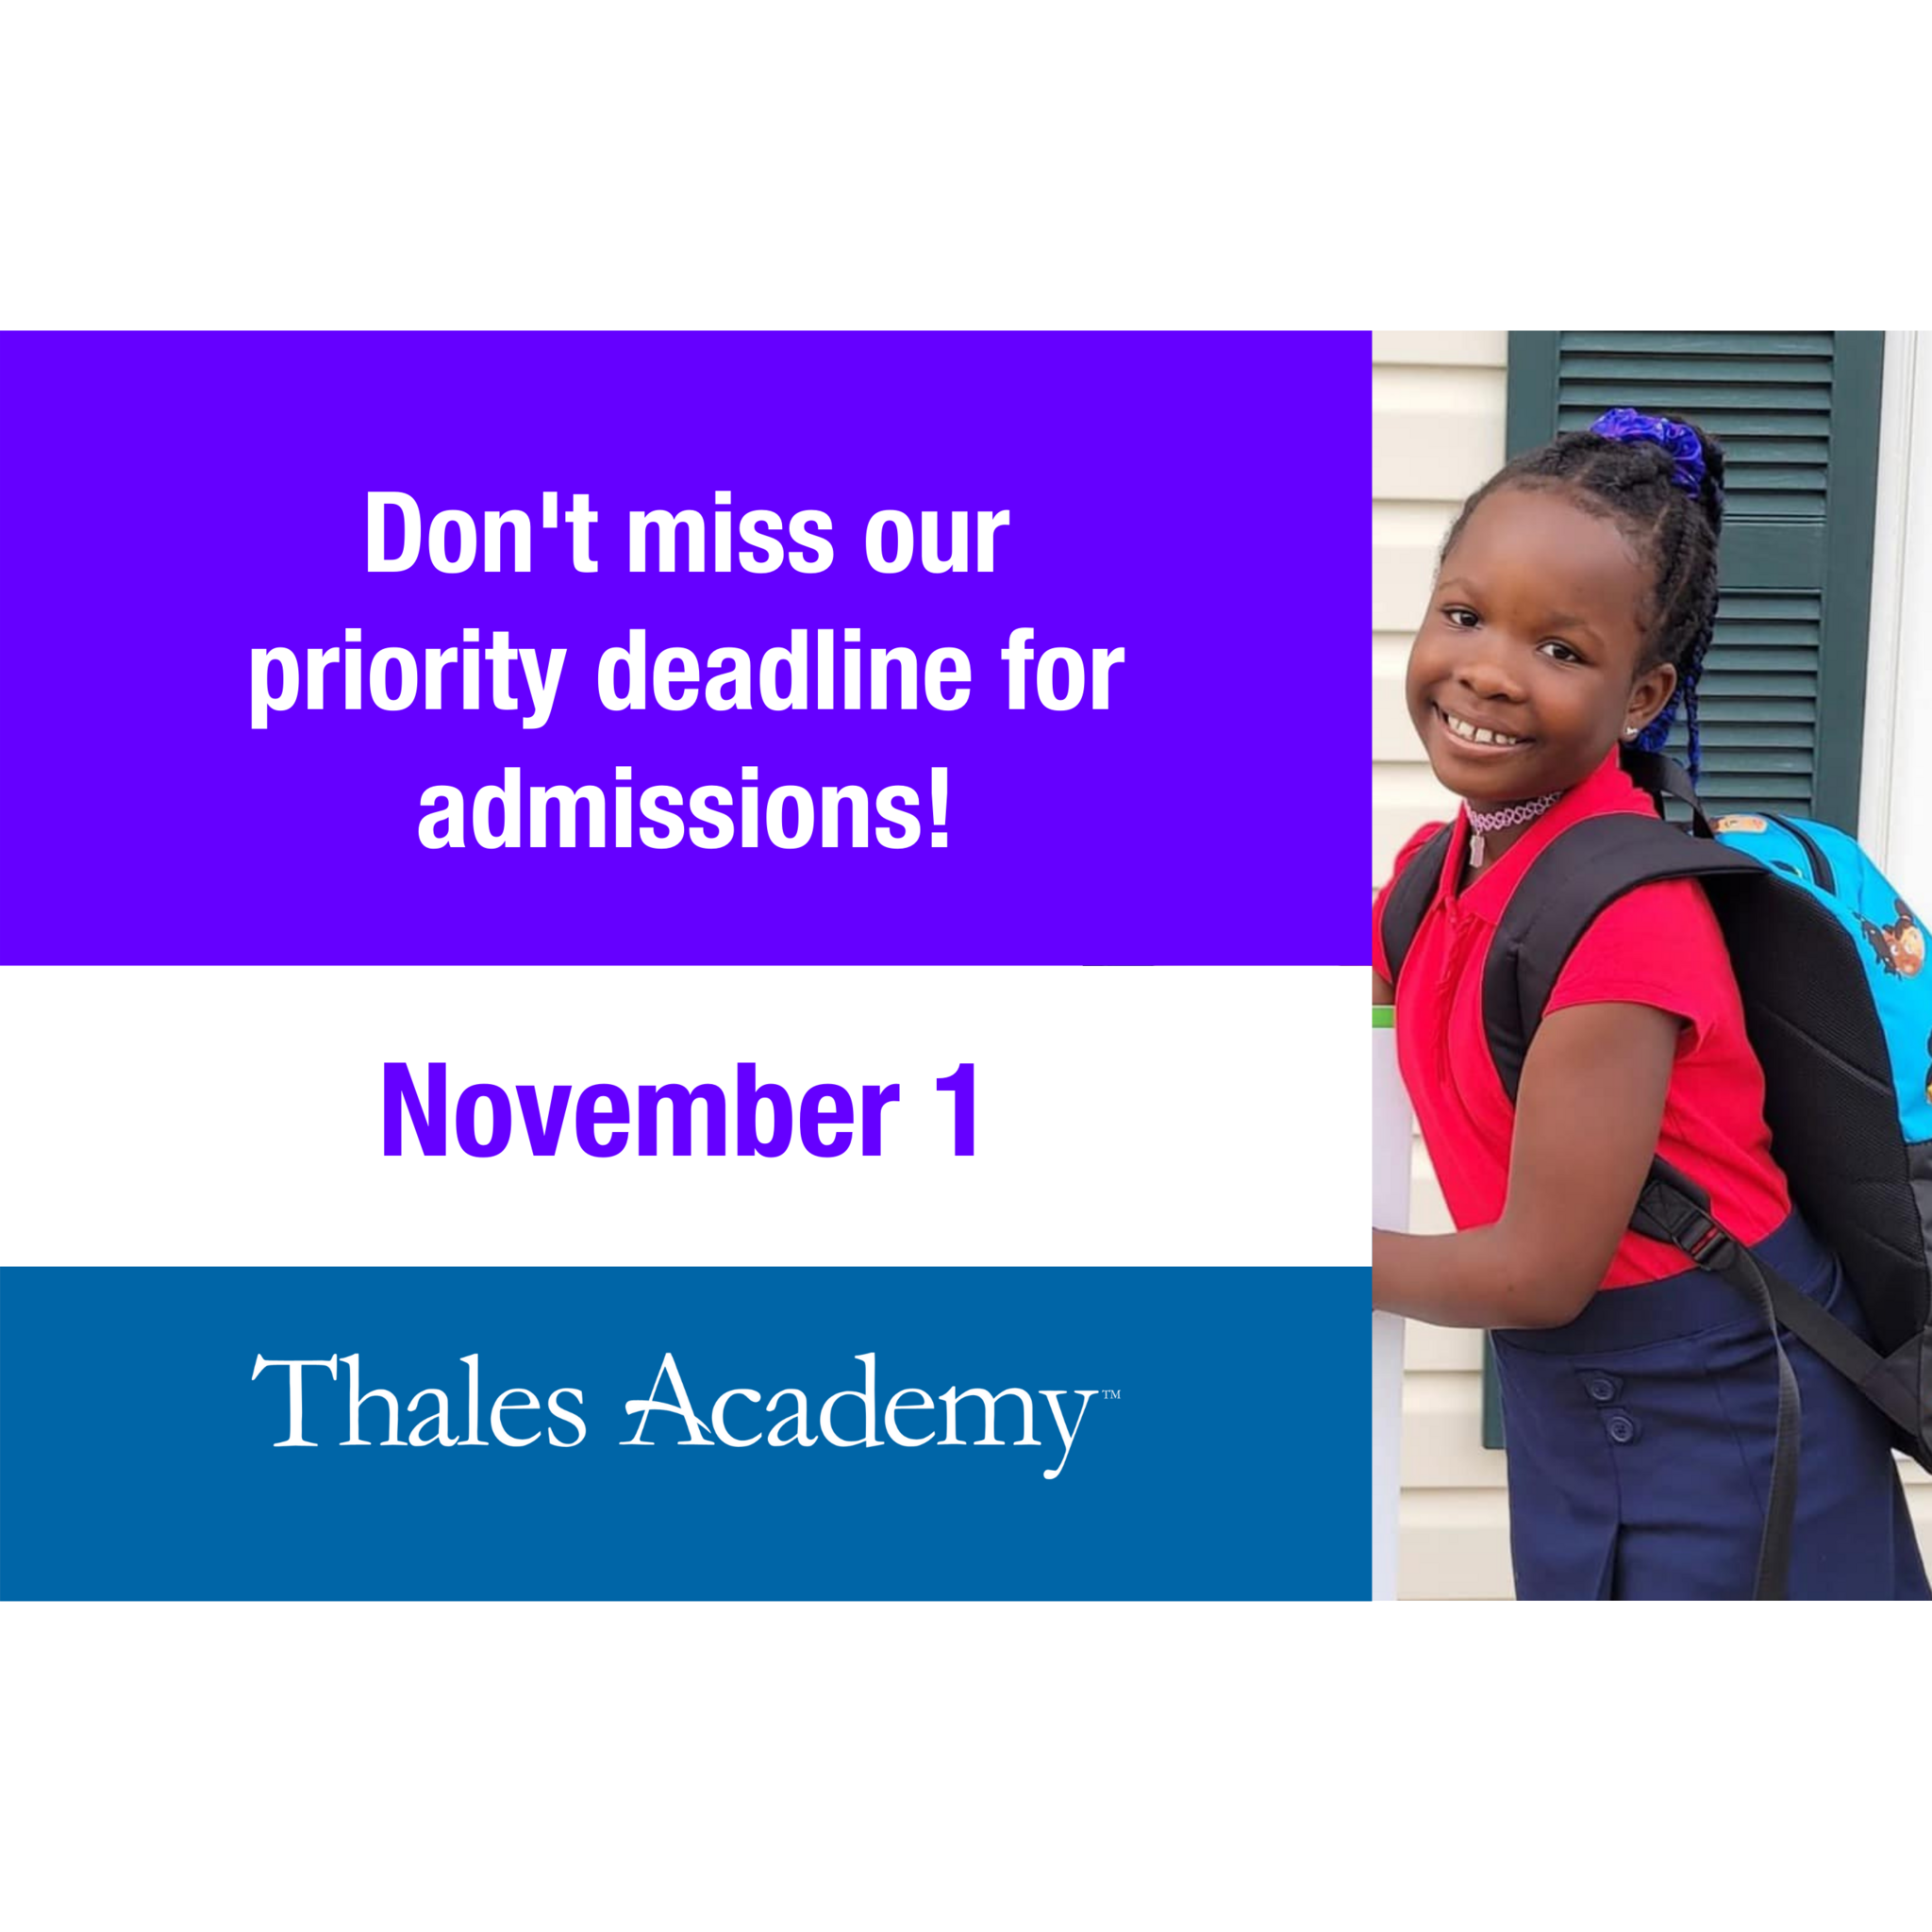 Thales Academy Holly Springs